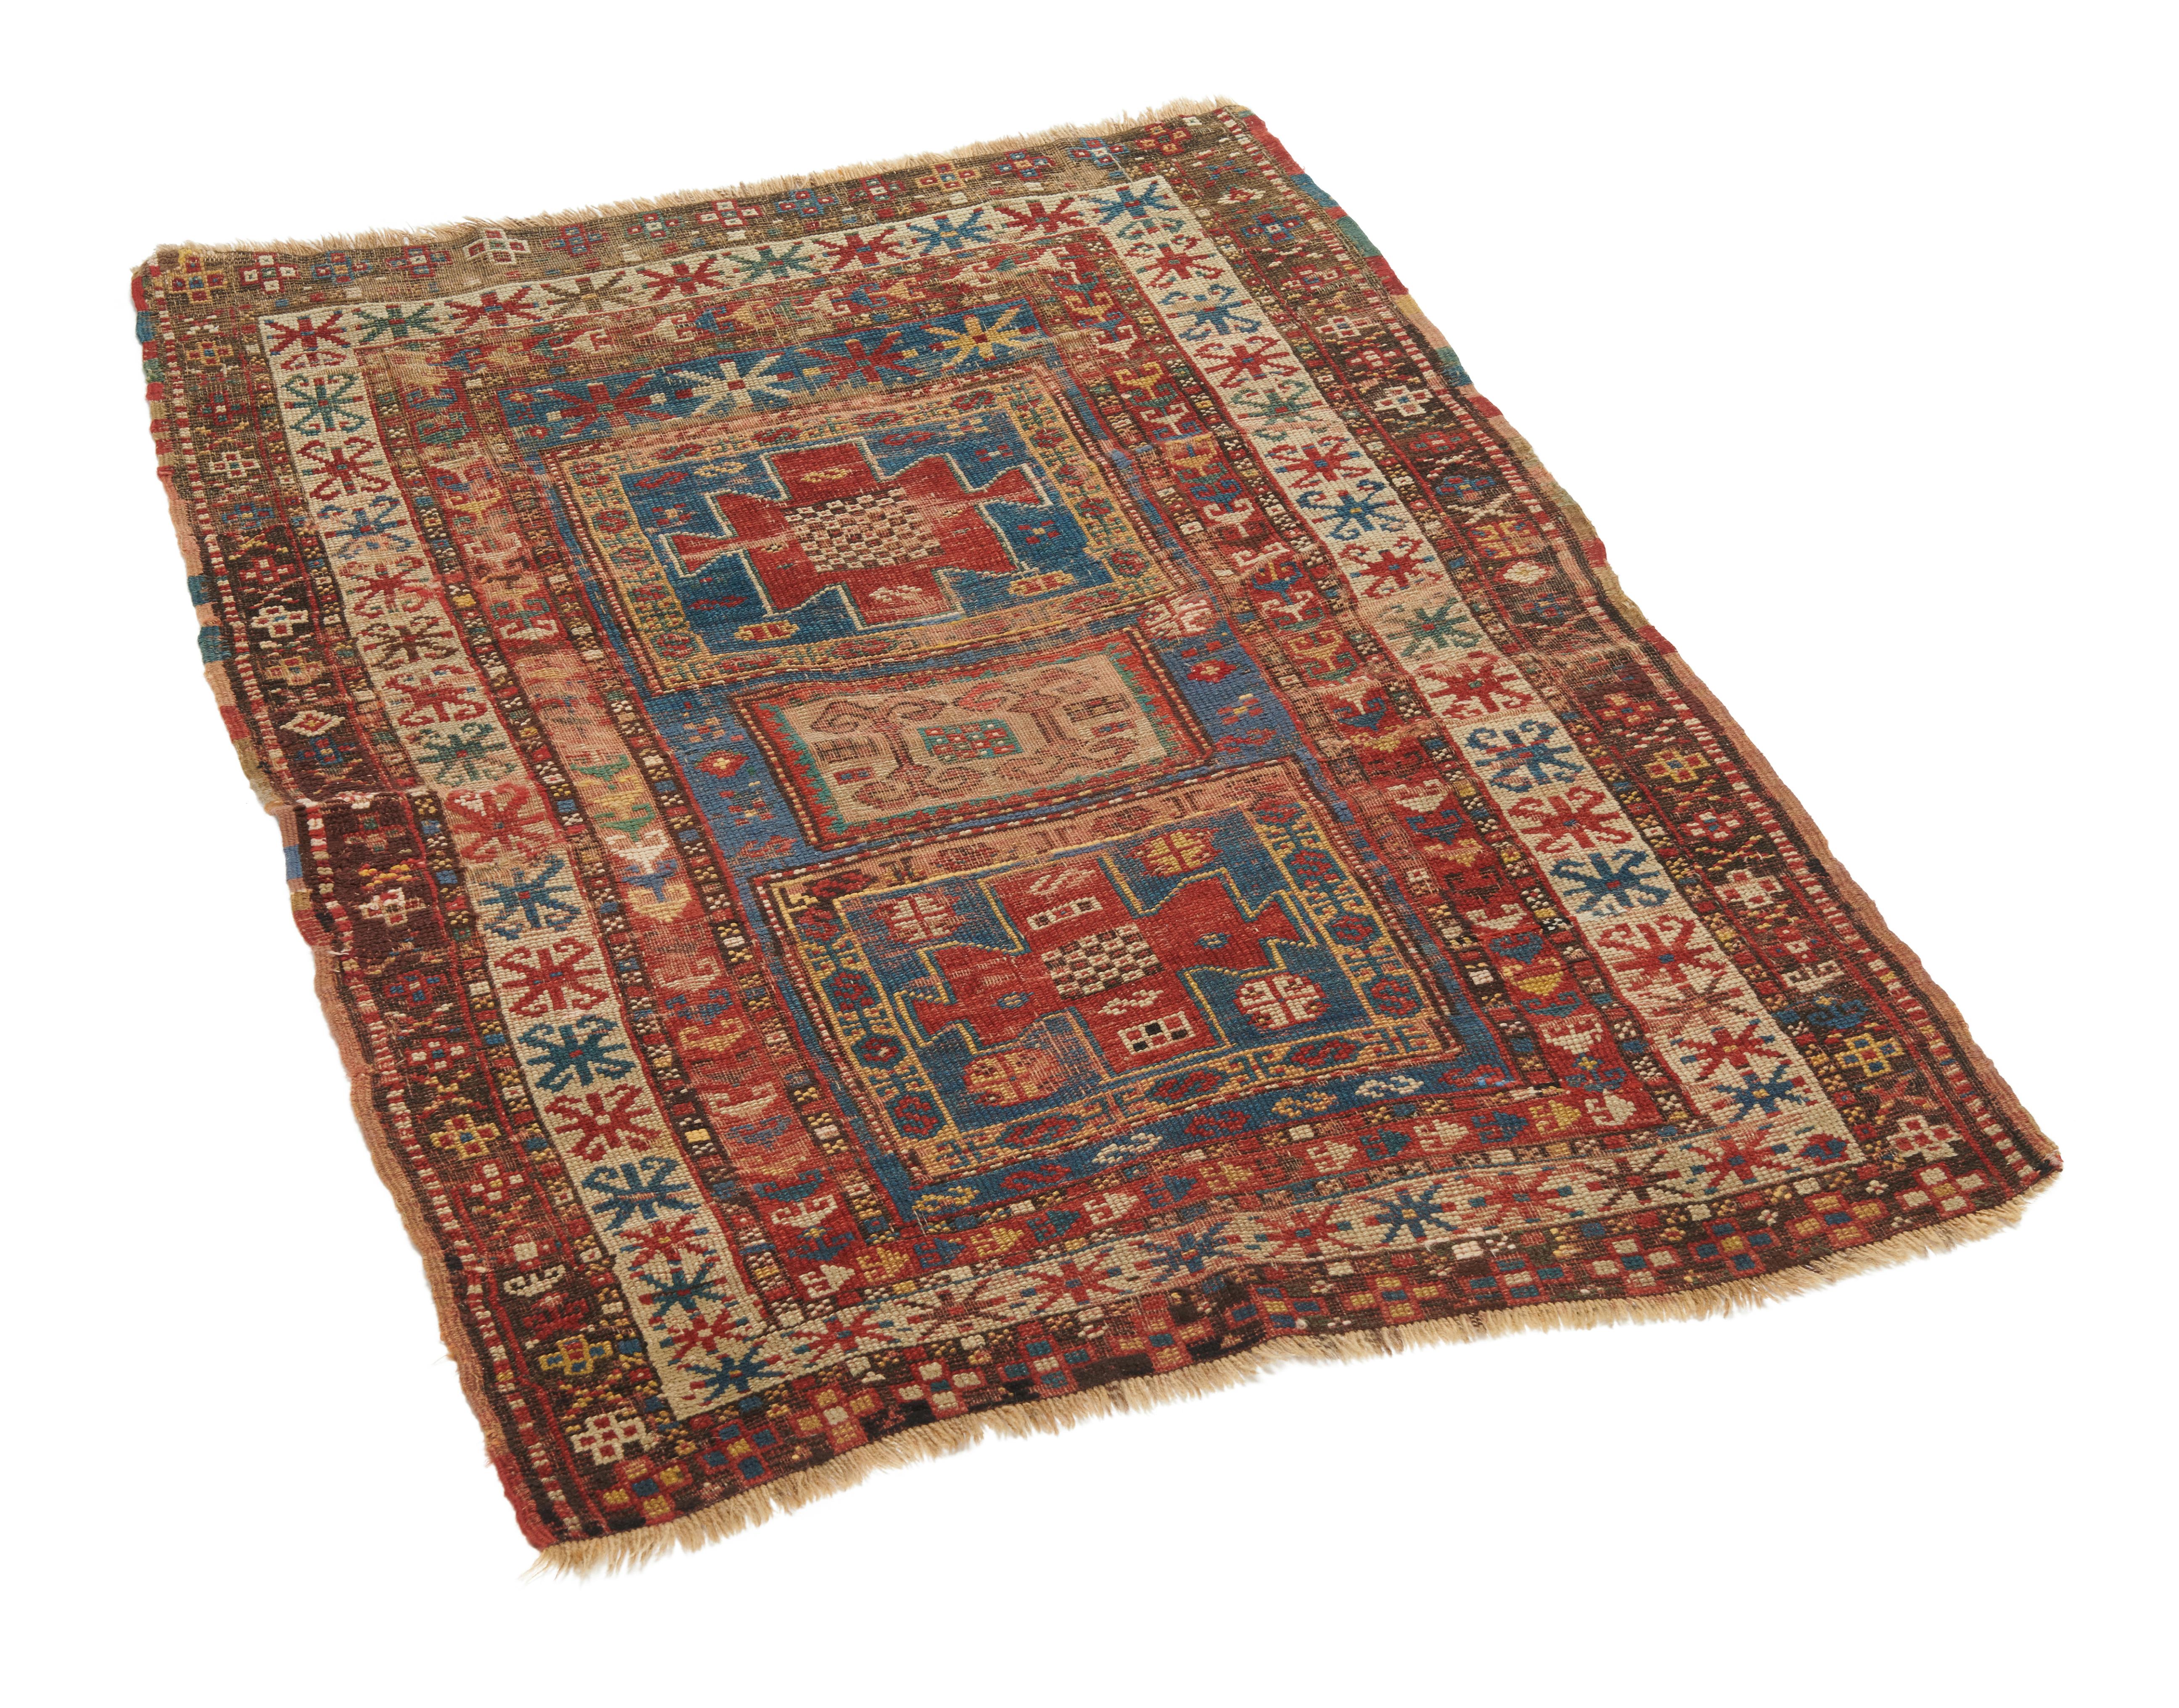 This wonderful Kazak rug's pattern element outlined in blue is a water basin of a formal garden. The balance of the field is served with single rows of petalled rosettes, adjacent to the inside border. 

Caucasus is an area that includes